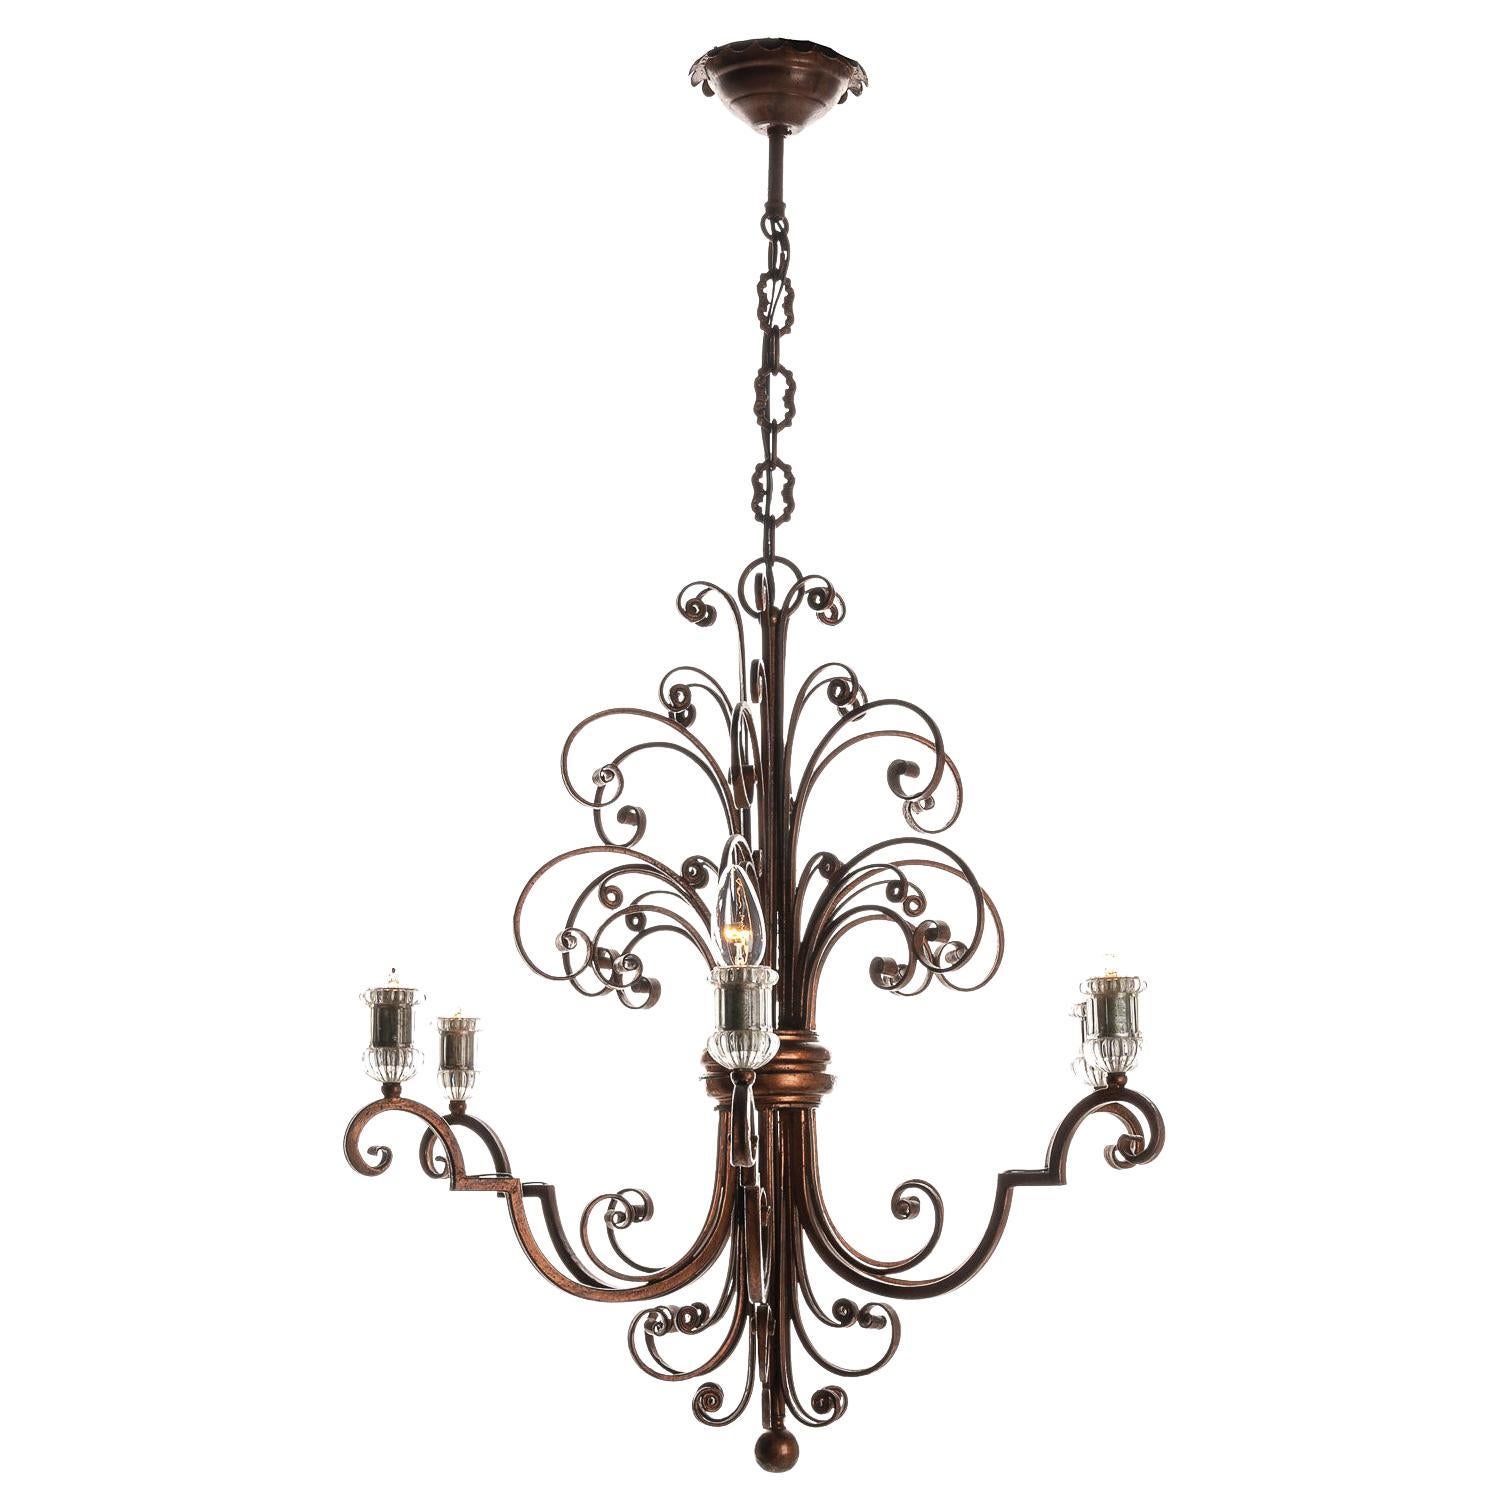 This is a stunningly decorative lamp from 1940s Italy. Designed by Banci, this highly decorative piece is a classic. The chain for this lamp can be extended by 60cm, allowing you to choose the height that suits your space. This lamp has a rich, deep